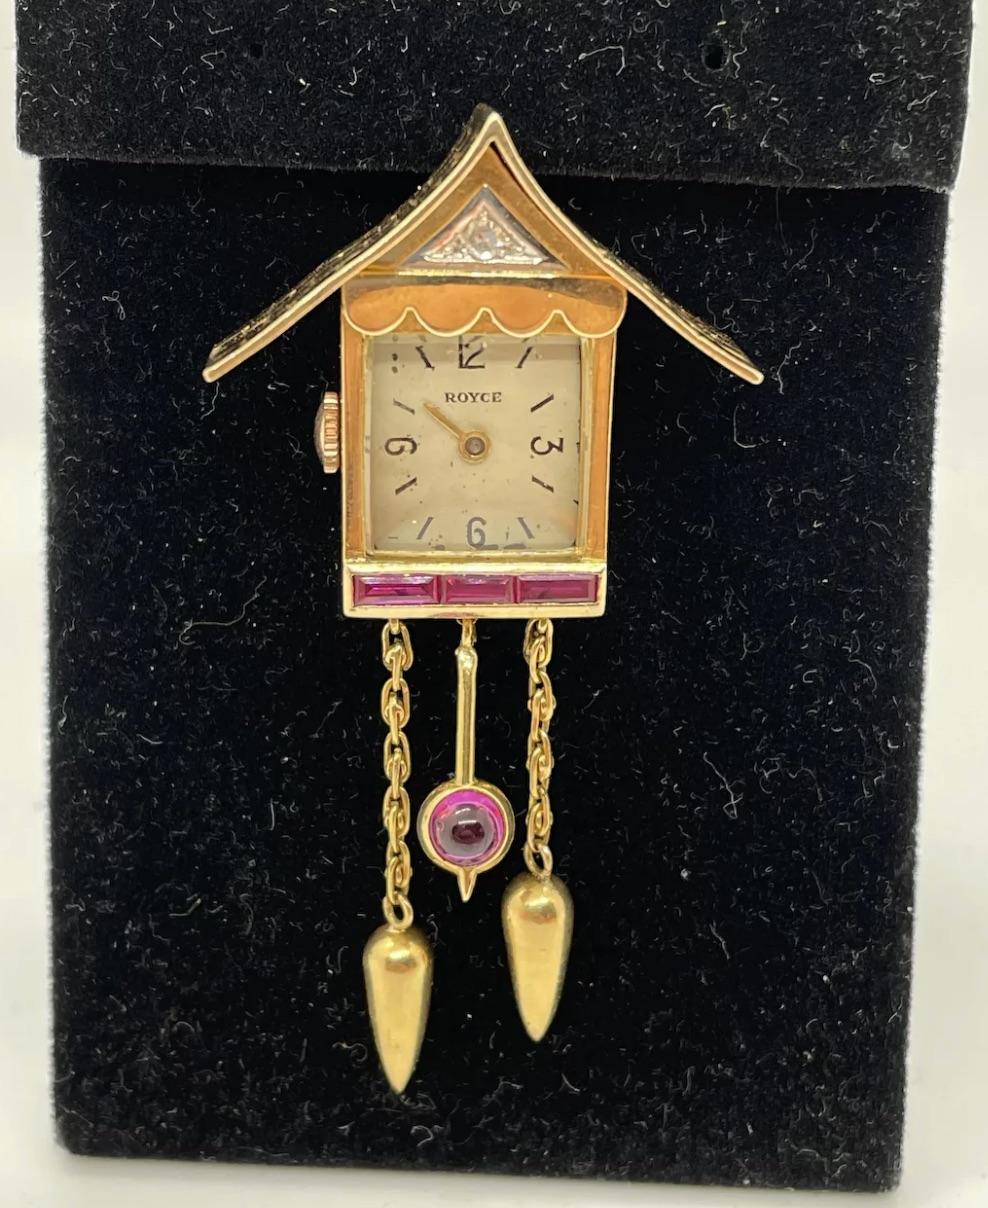 18k Gold Diamond Royce Watch Pin Cuckoo Pagoda

Consistent with age and use please see the photos for condition
Please ask for more photos if you need we will send them with in 24-48 hours

Due to the item's age do not expect items to be in perfect